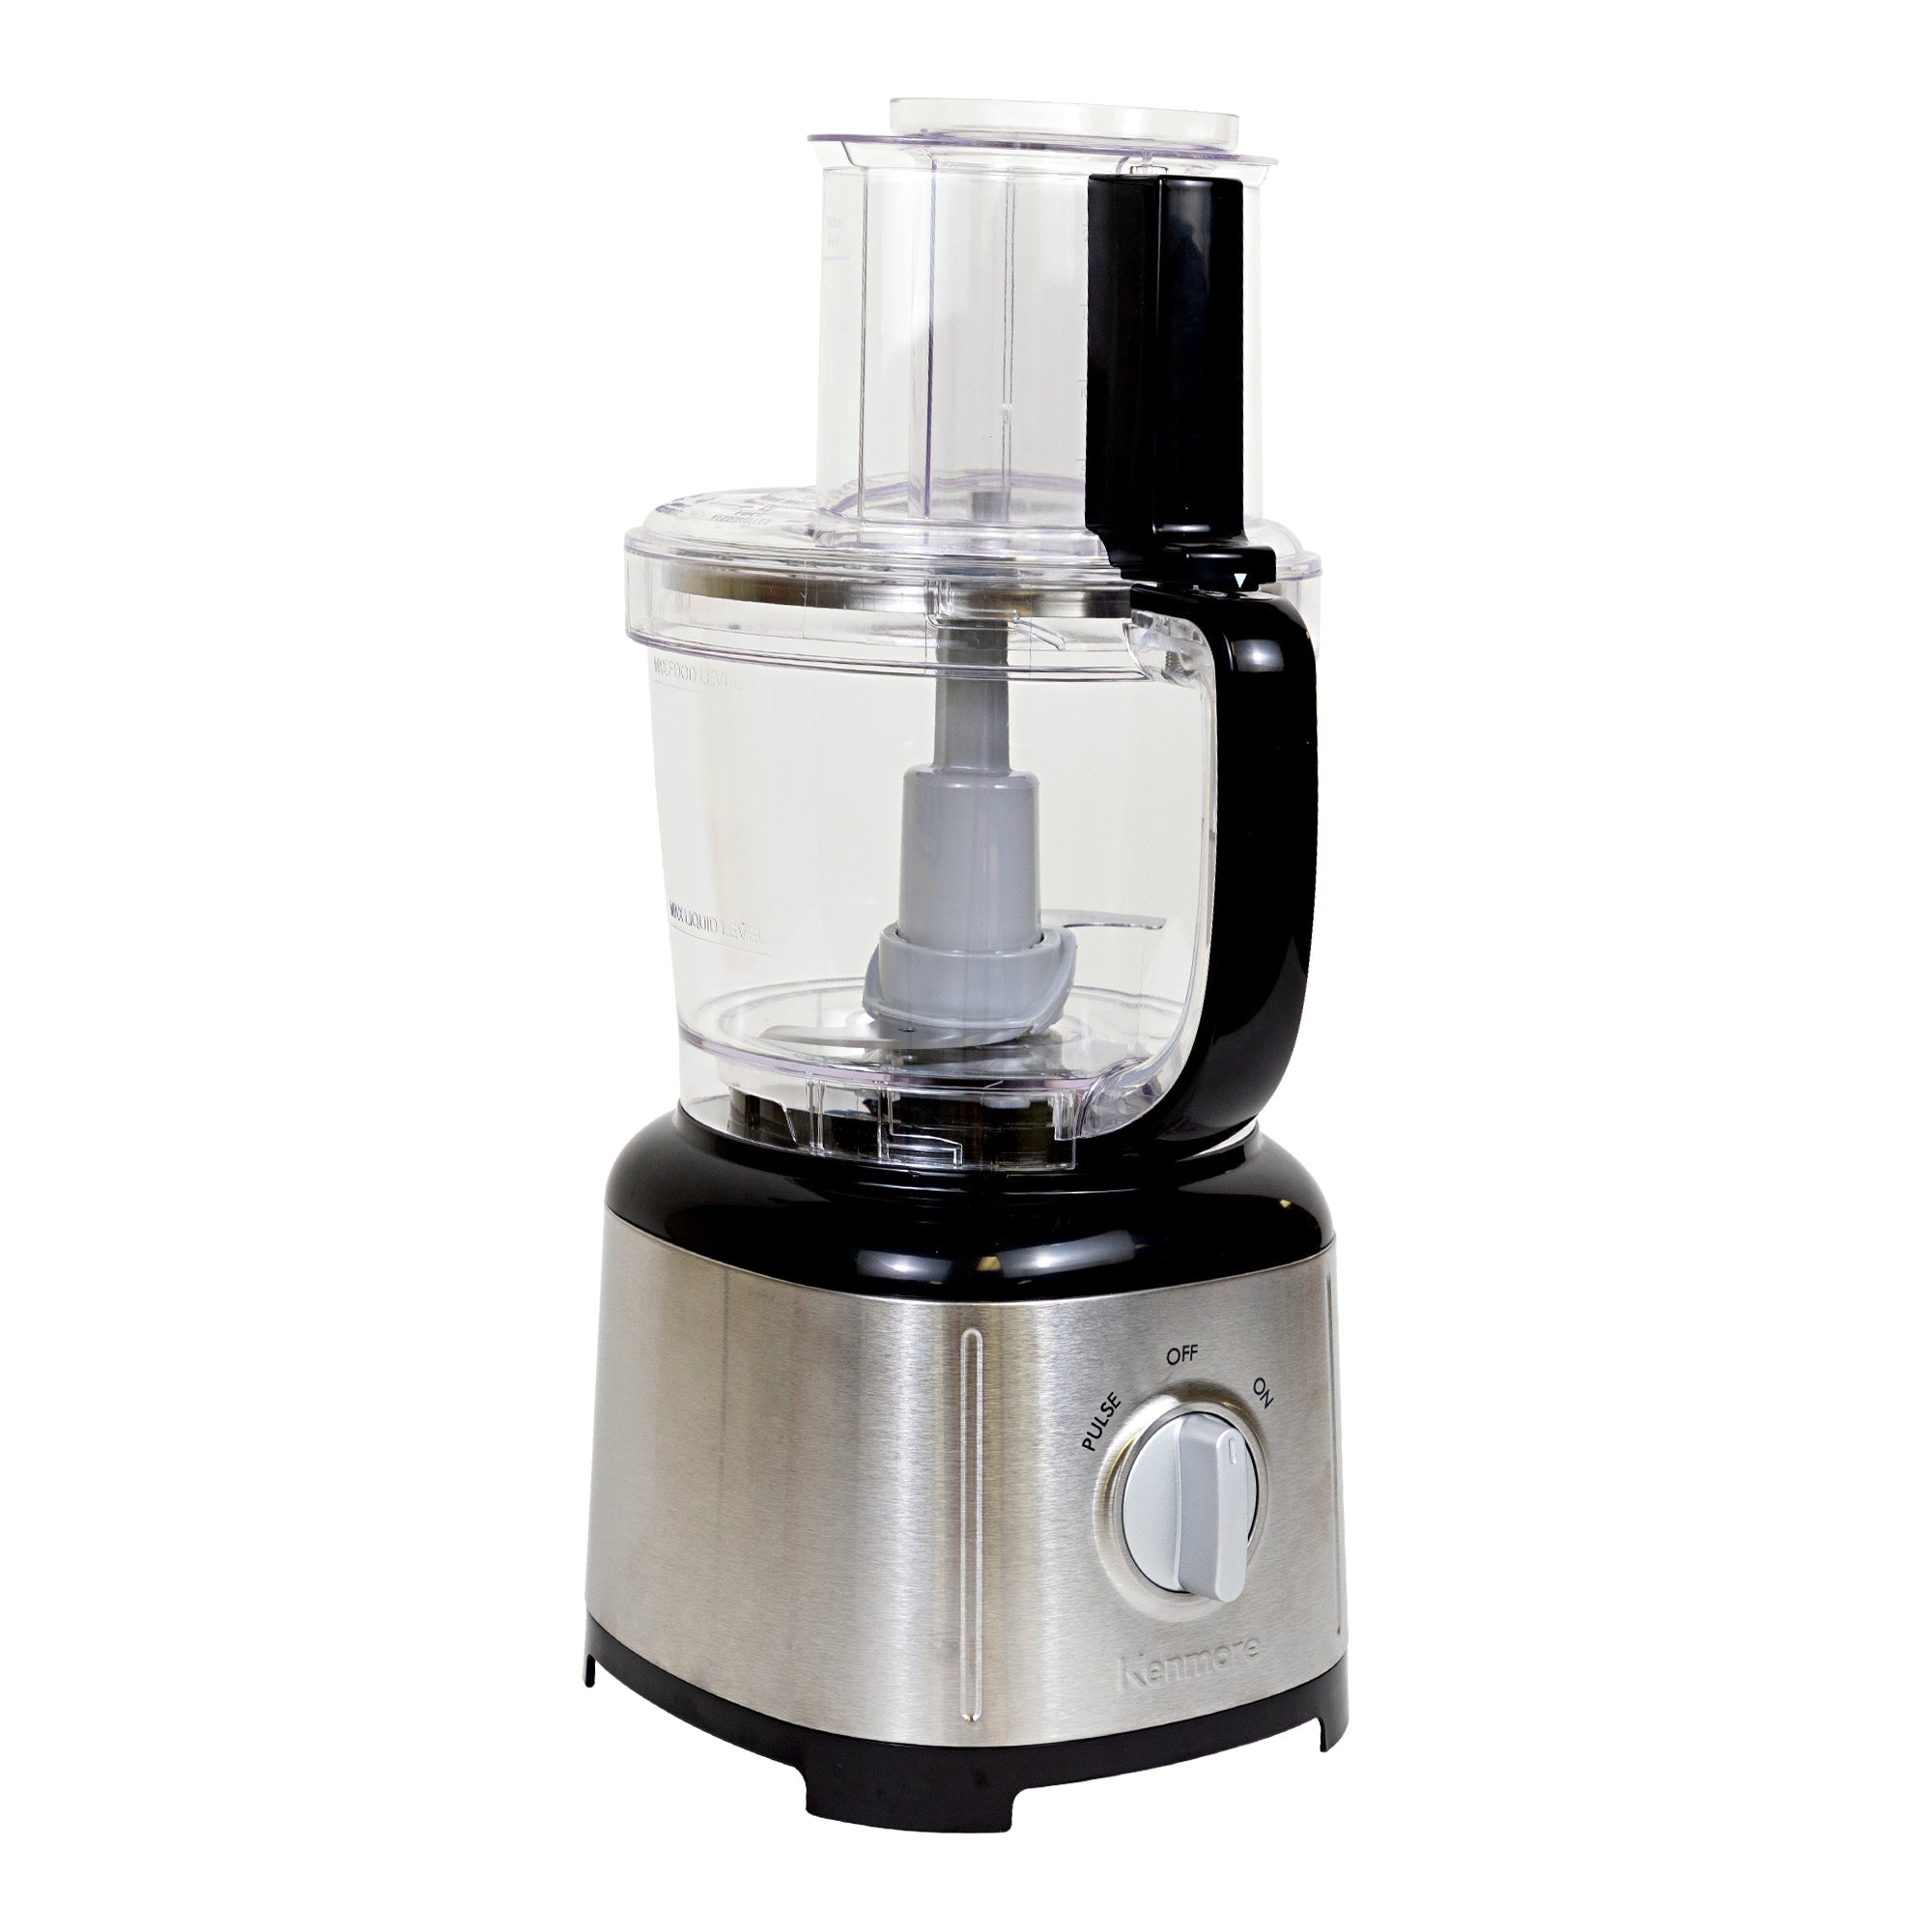 Kenmore 11 cup food processor and vegetable chopper on a white background